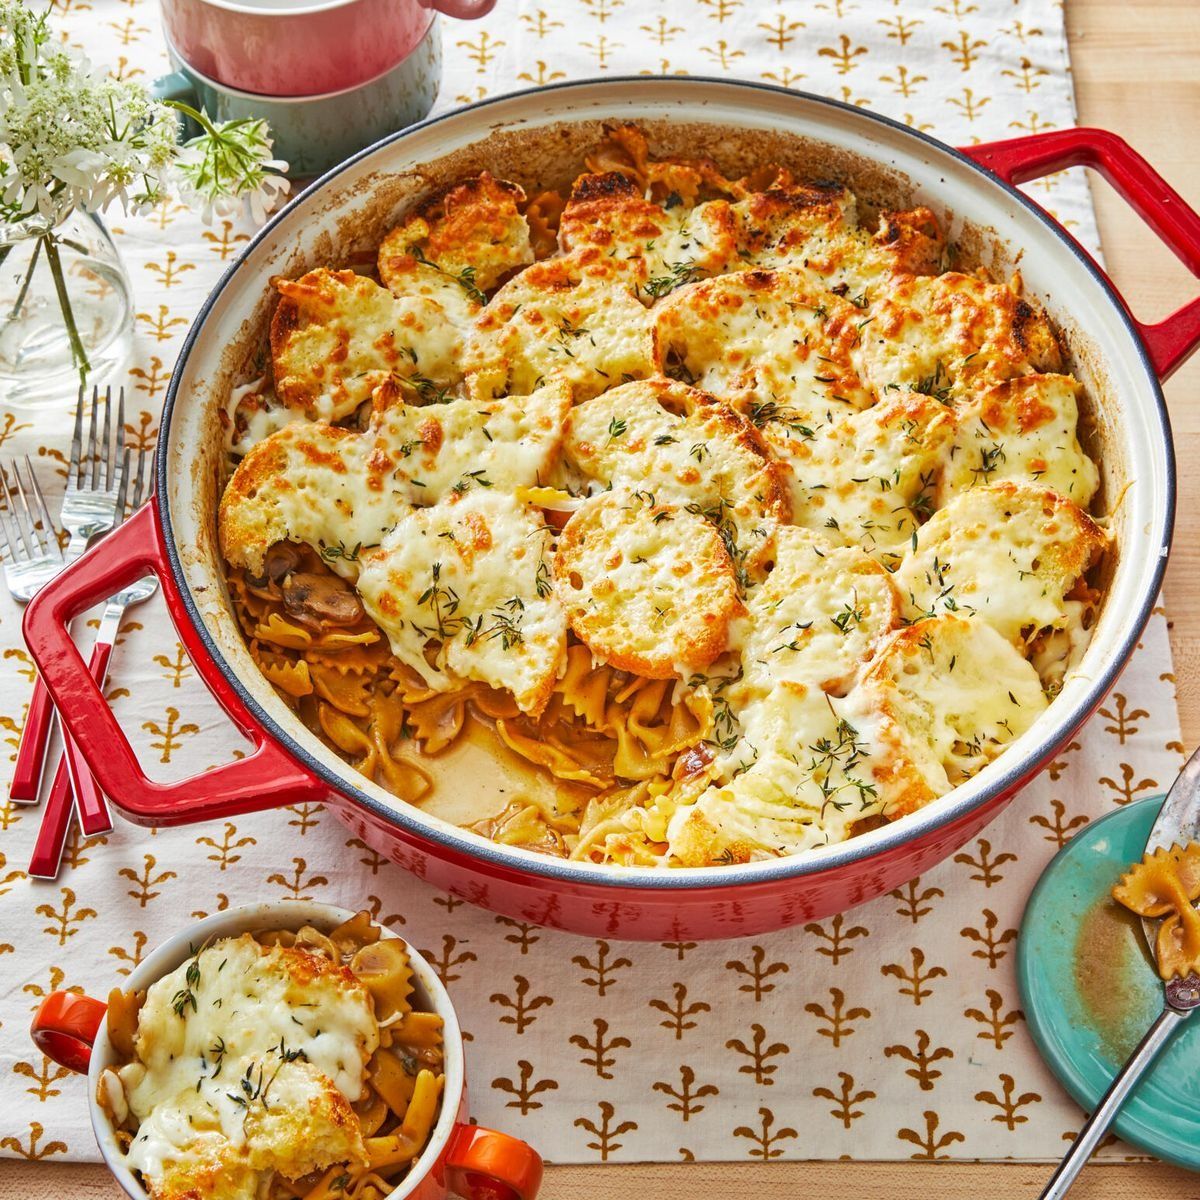 These Baked Pasta Recipes Come Out Bubbling Hot and Golden